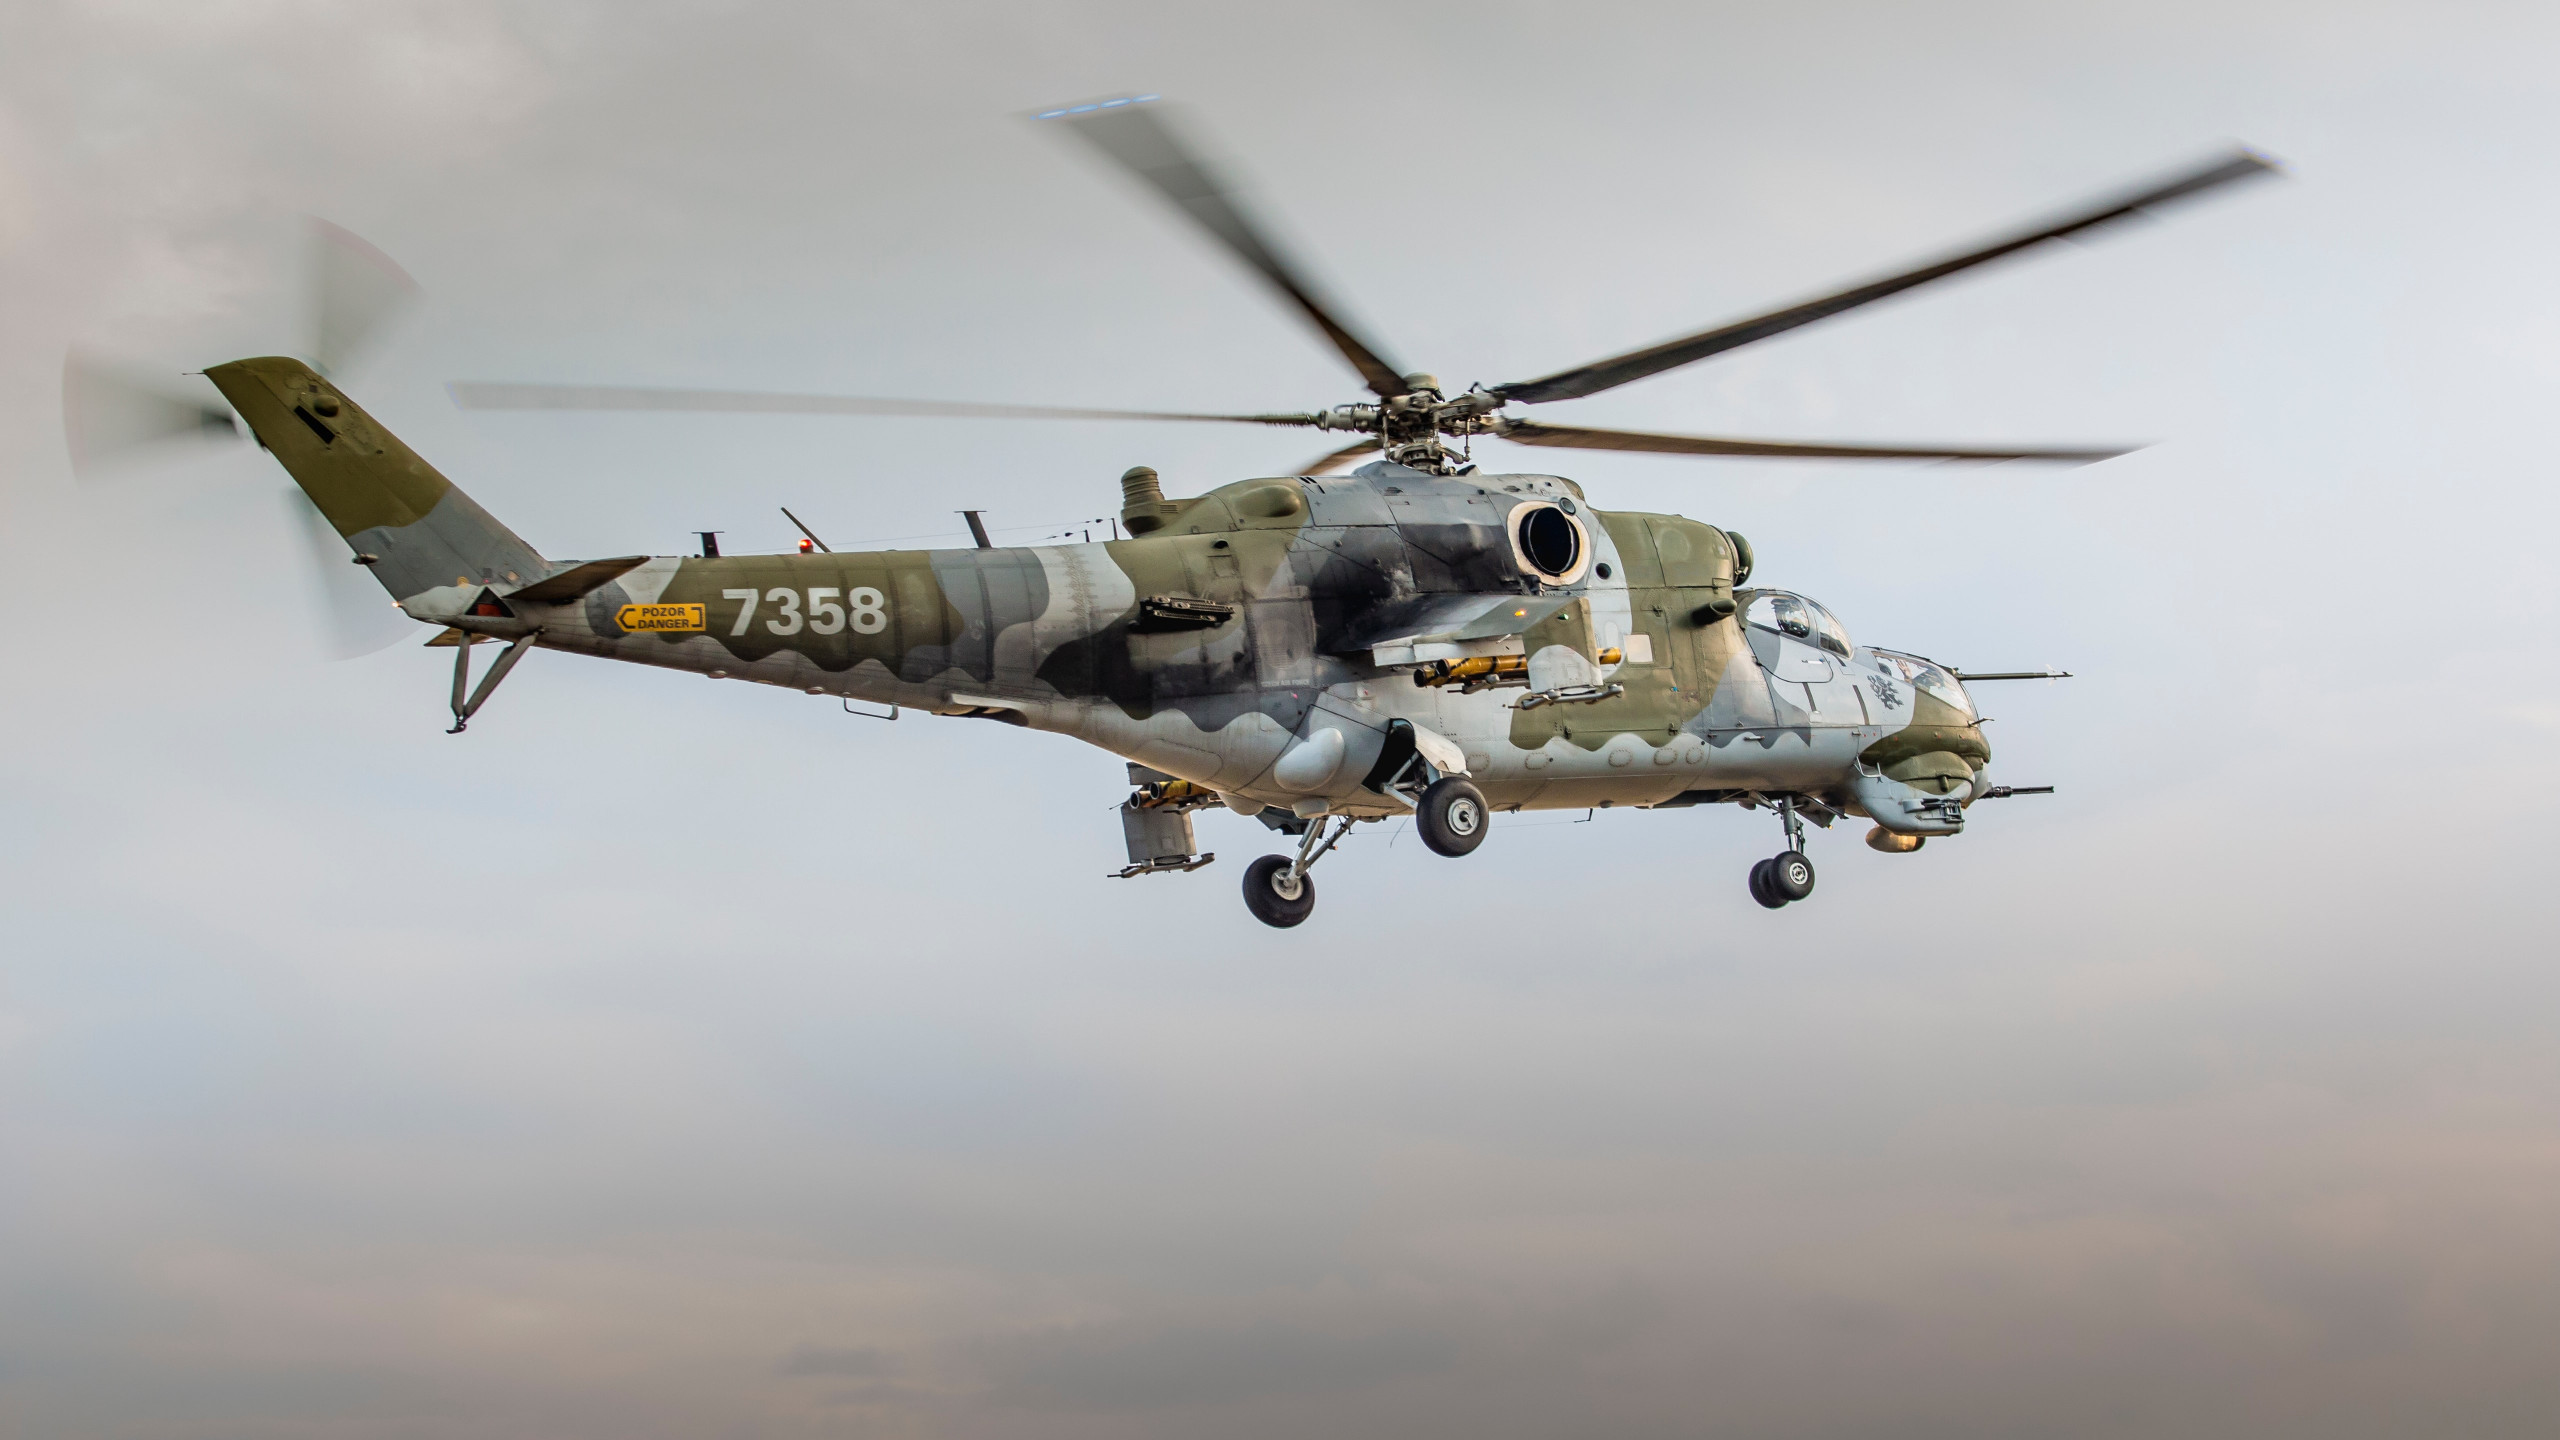 Military helicopter wallpaper 2560x1440